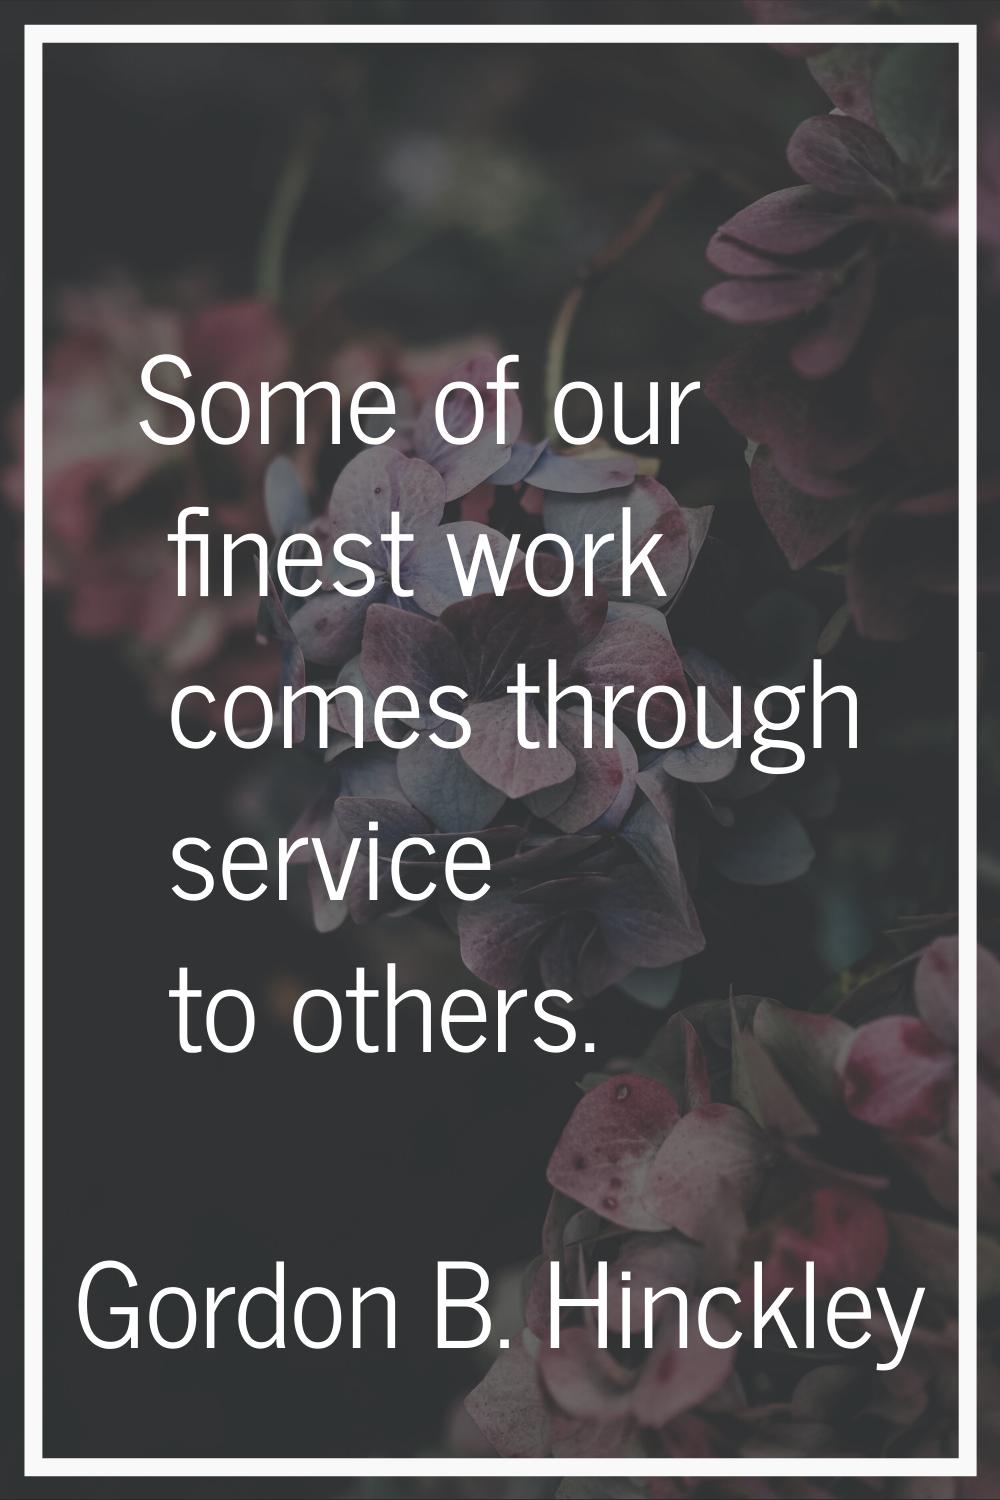 Some of our finest work comes through service to others.